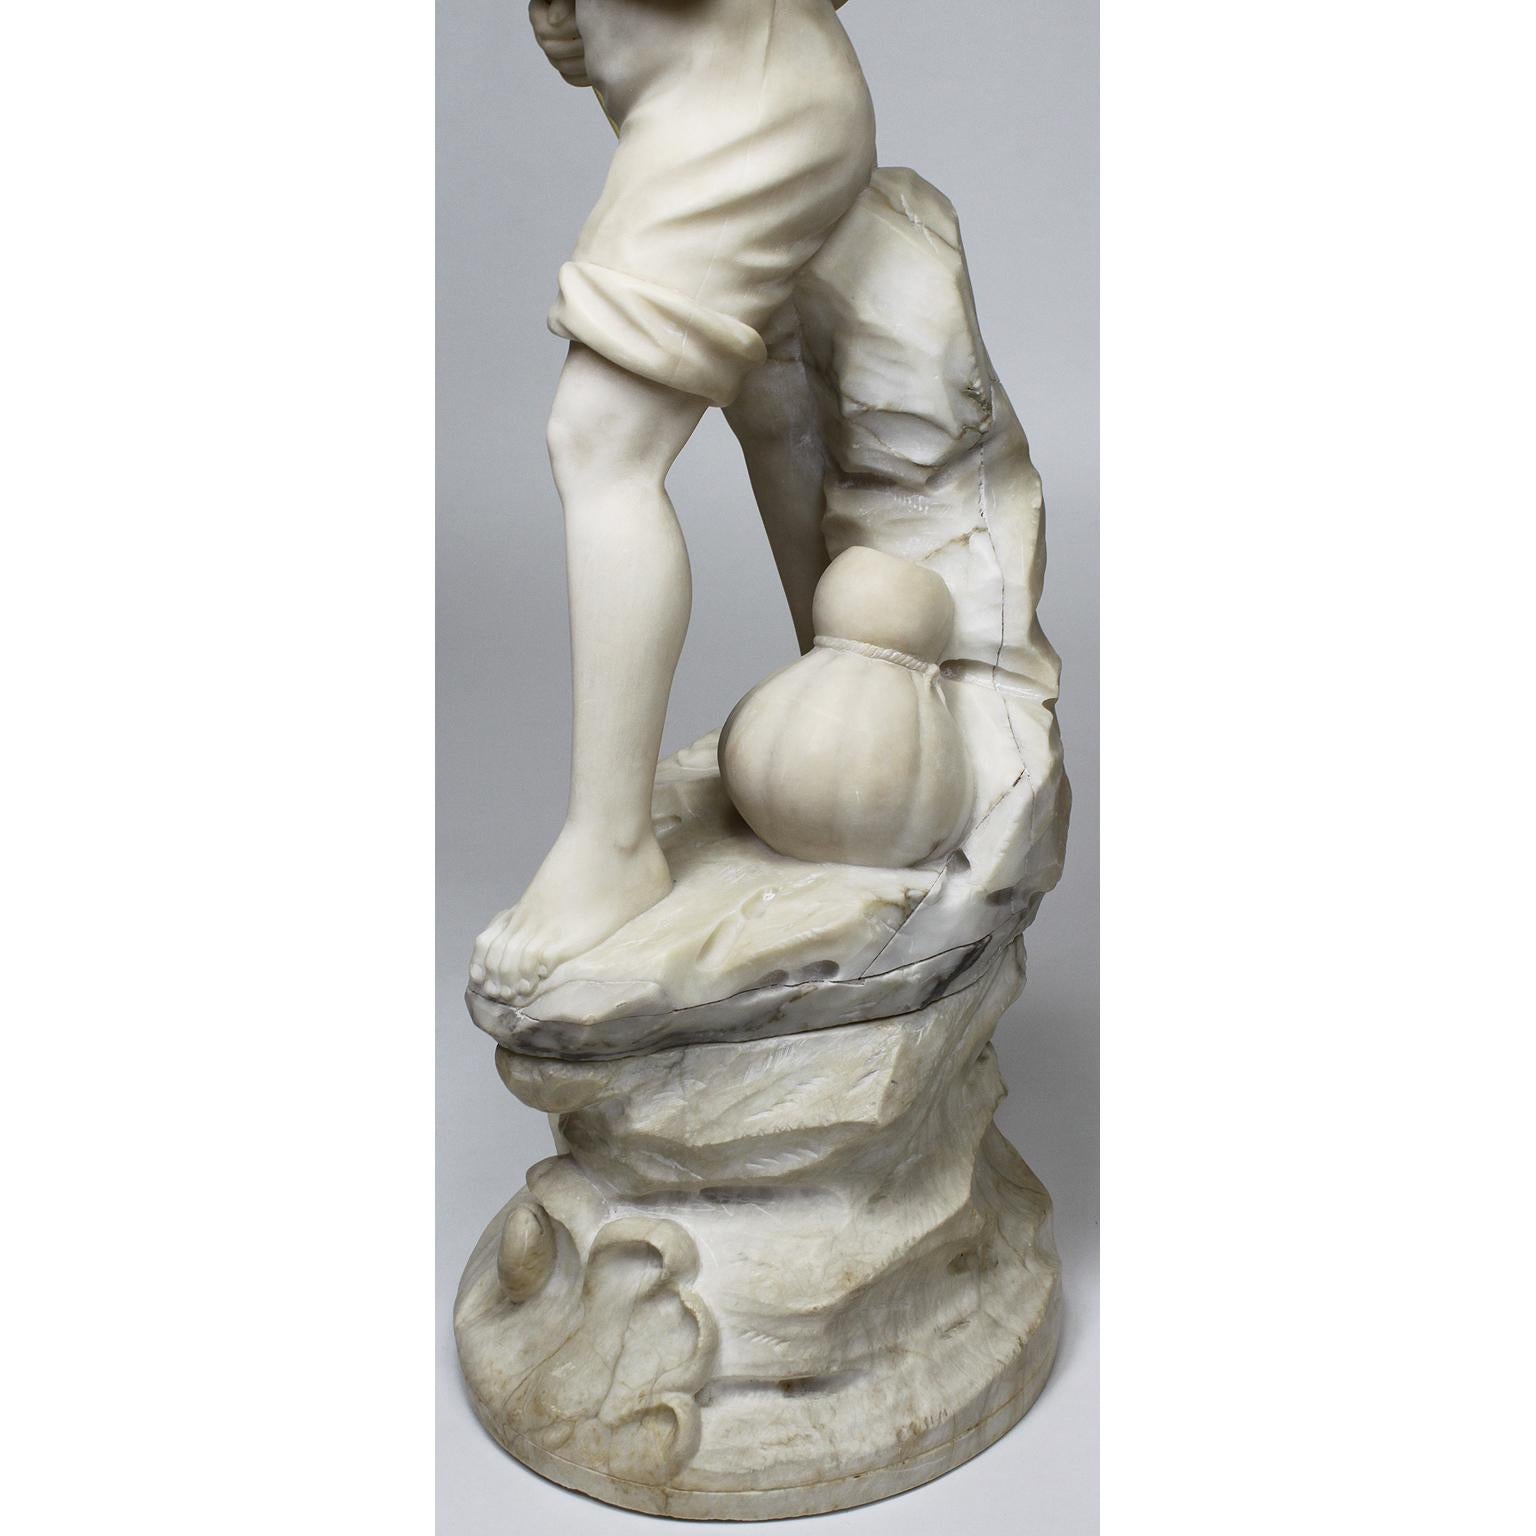 Charming Italian 19th-20th Century Carved Alabaster Figure of a Fisher Boy For Sale 5